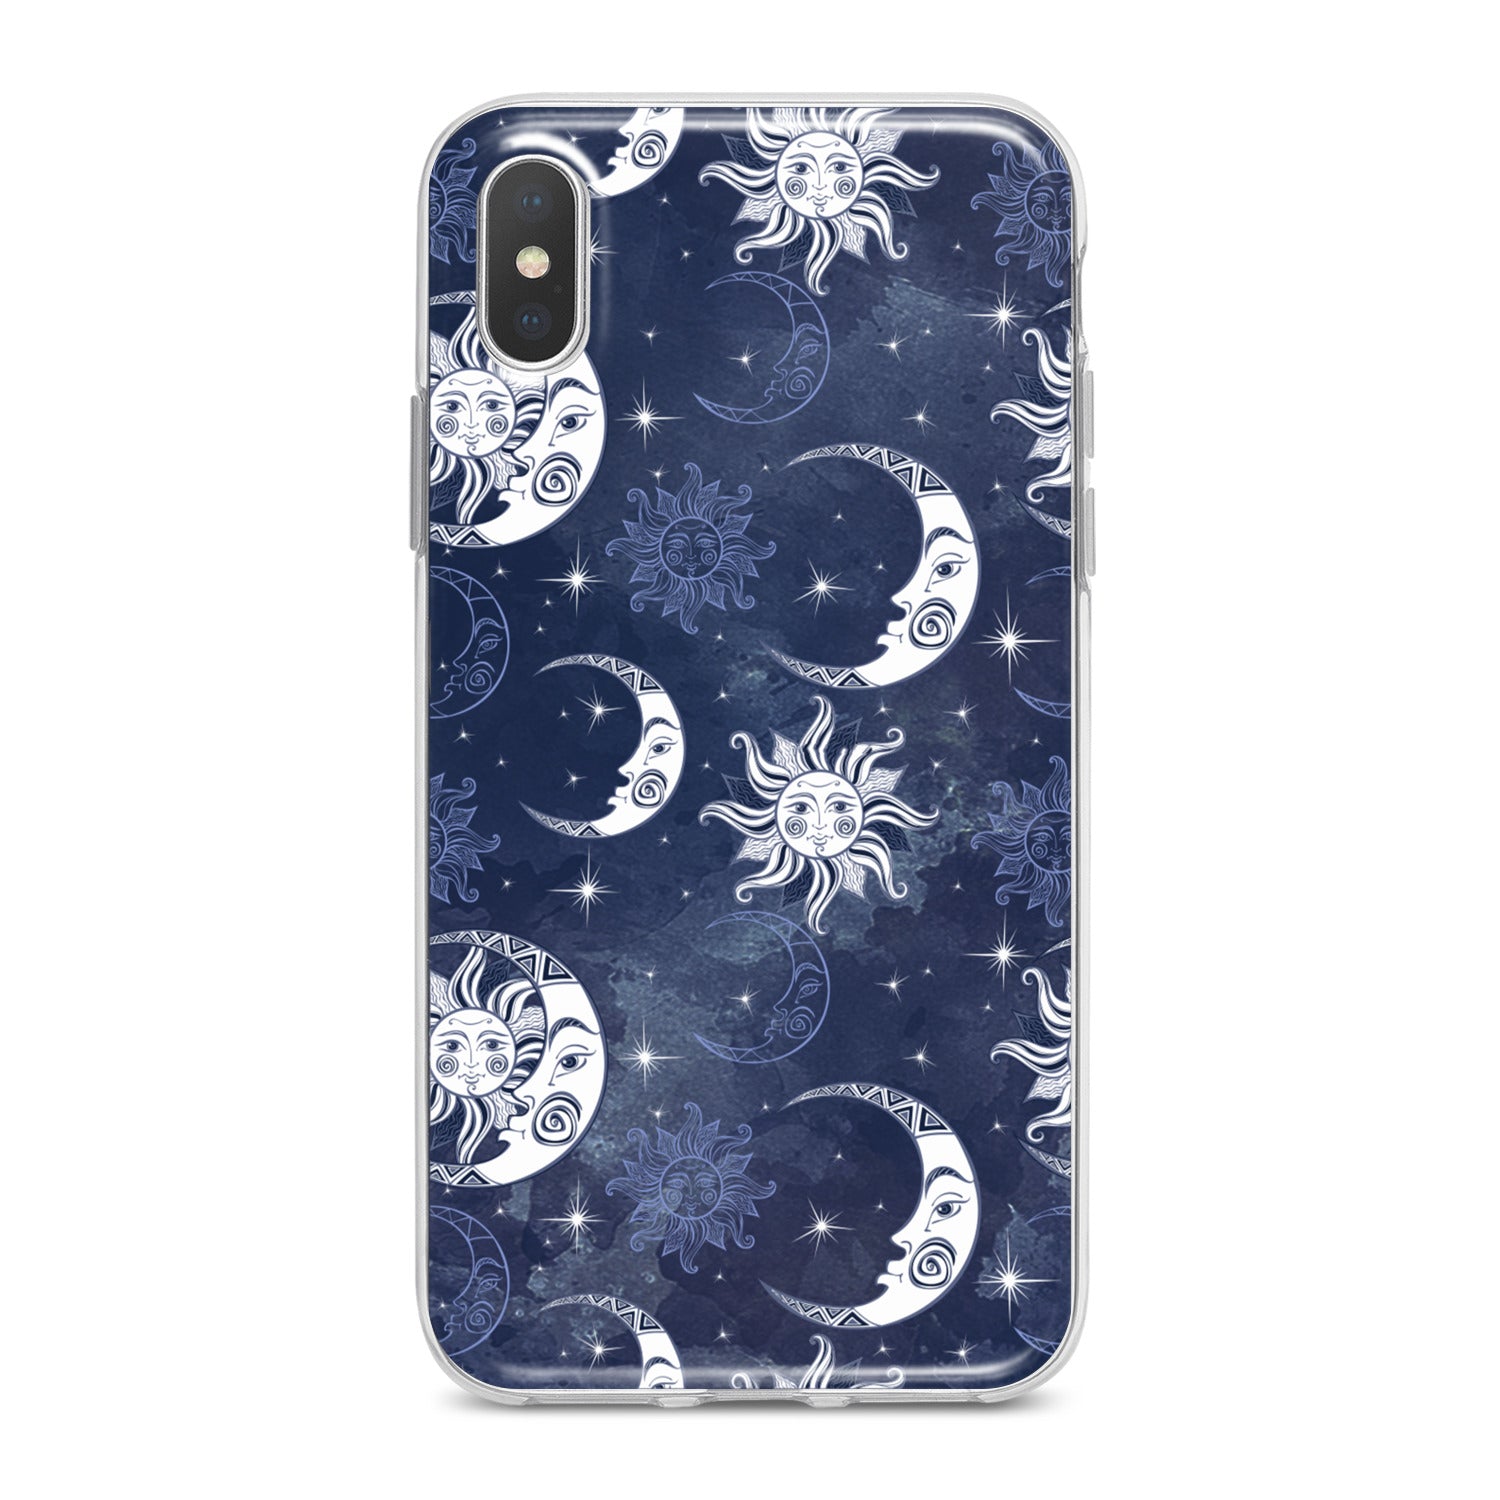 Lex Altern Celestial Theme Phone Case for your iPhone & Android phone.